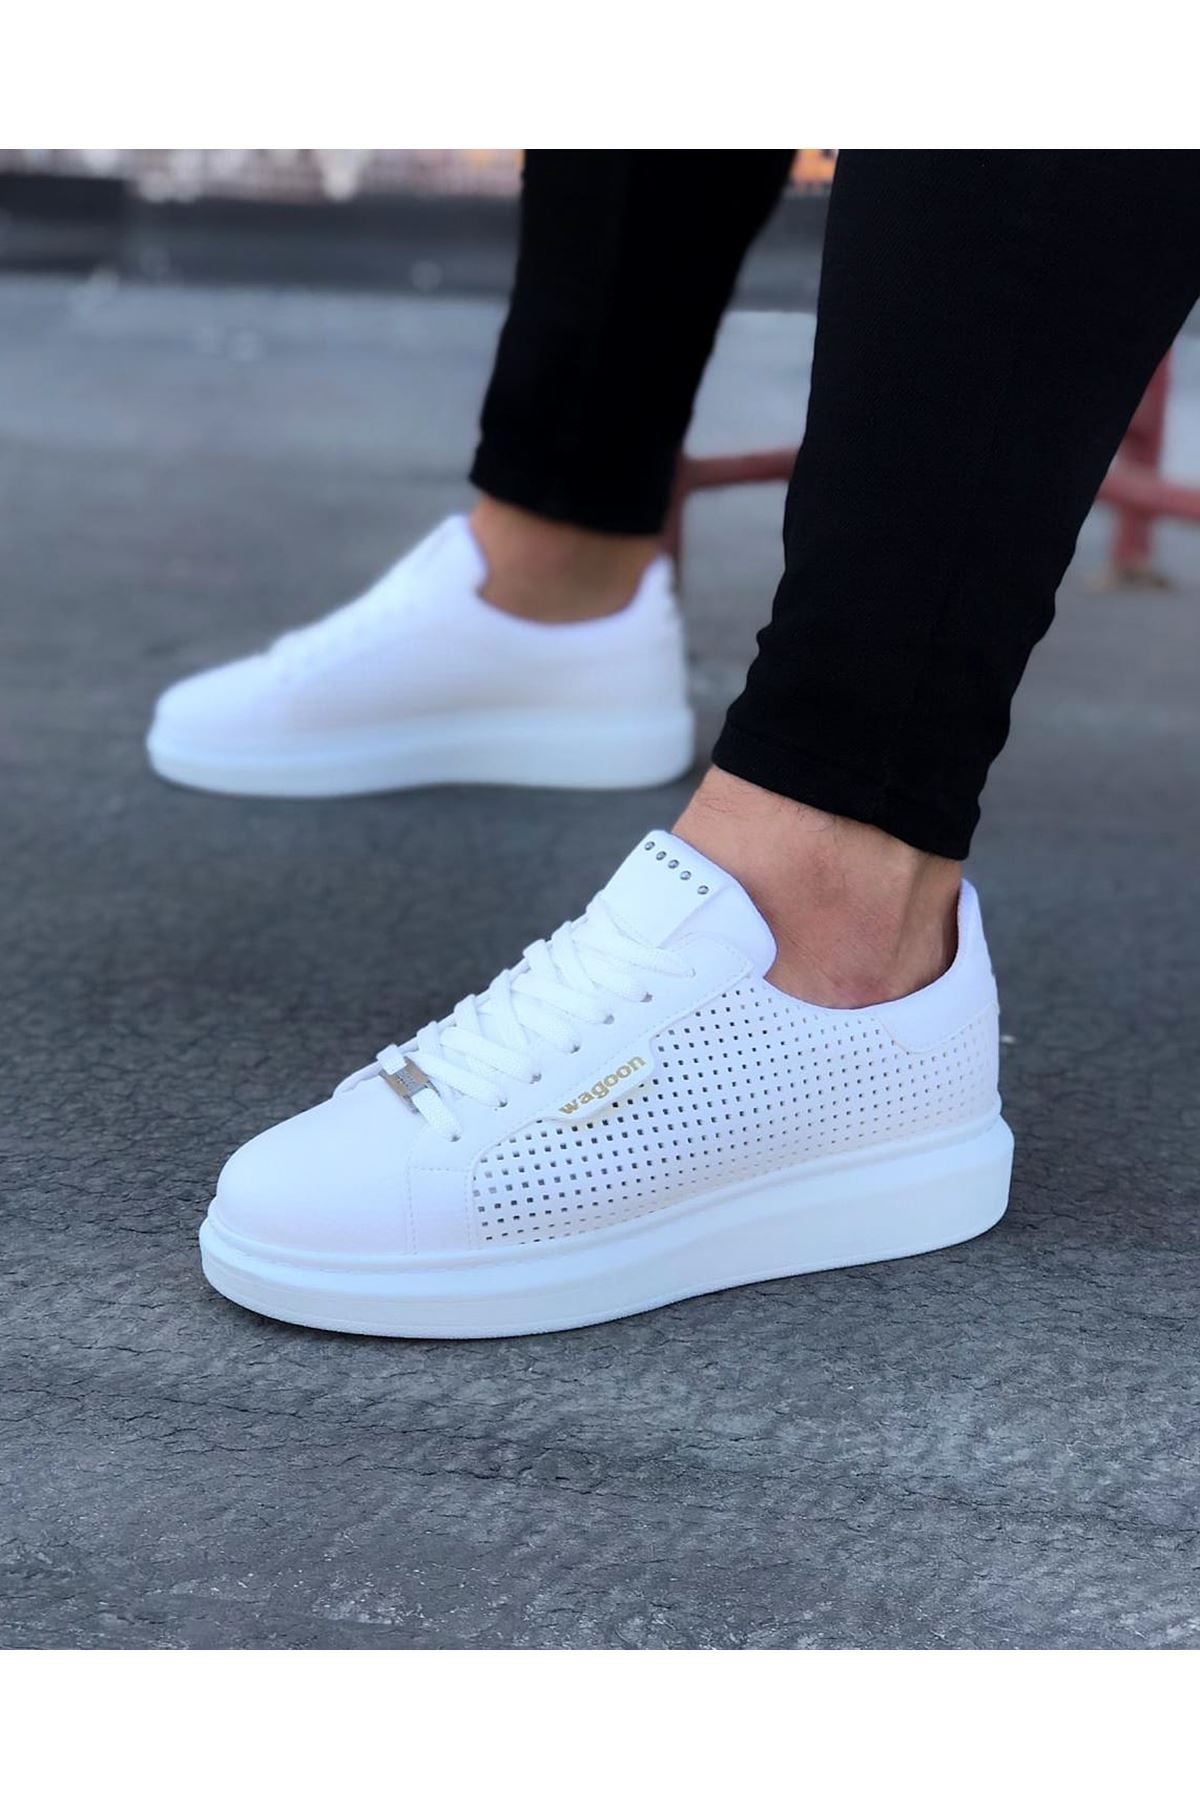 WG01 White Perforated Men's High-Sole Shoes sneakers - STREETMODE™